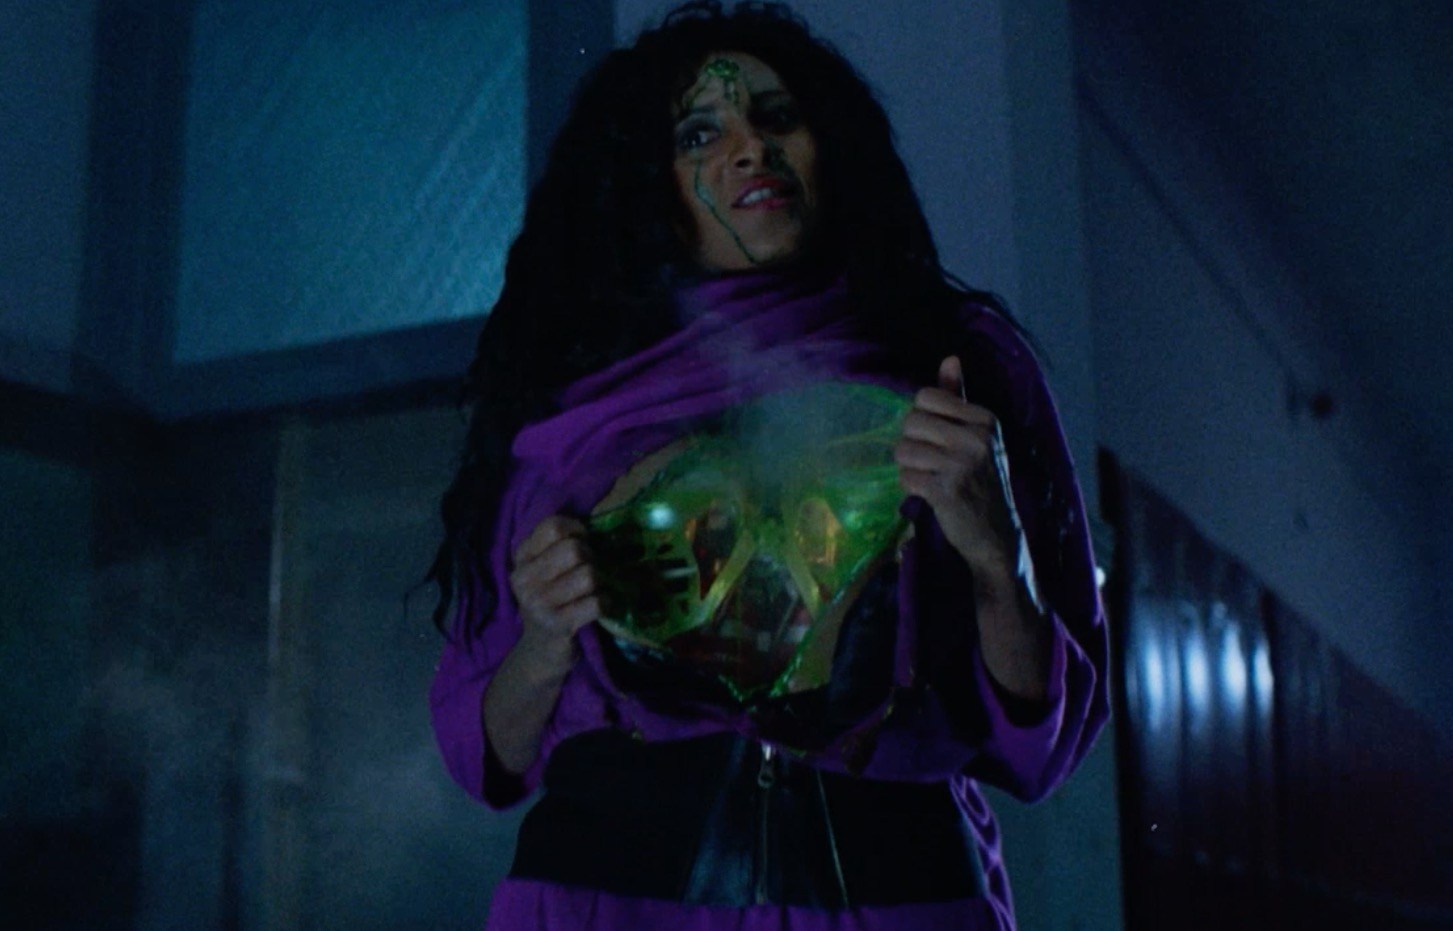 Pam Grier as killer android schoolteacher Ms Connors in Class of 1999 (1990)